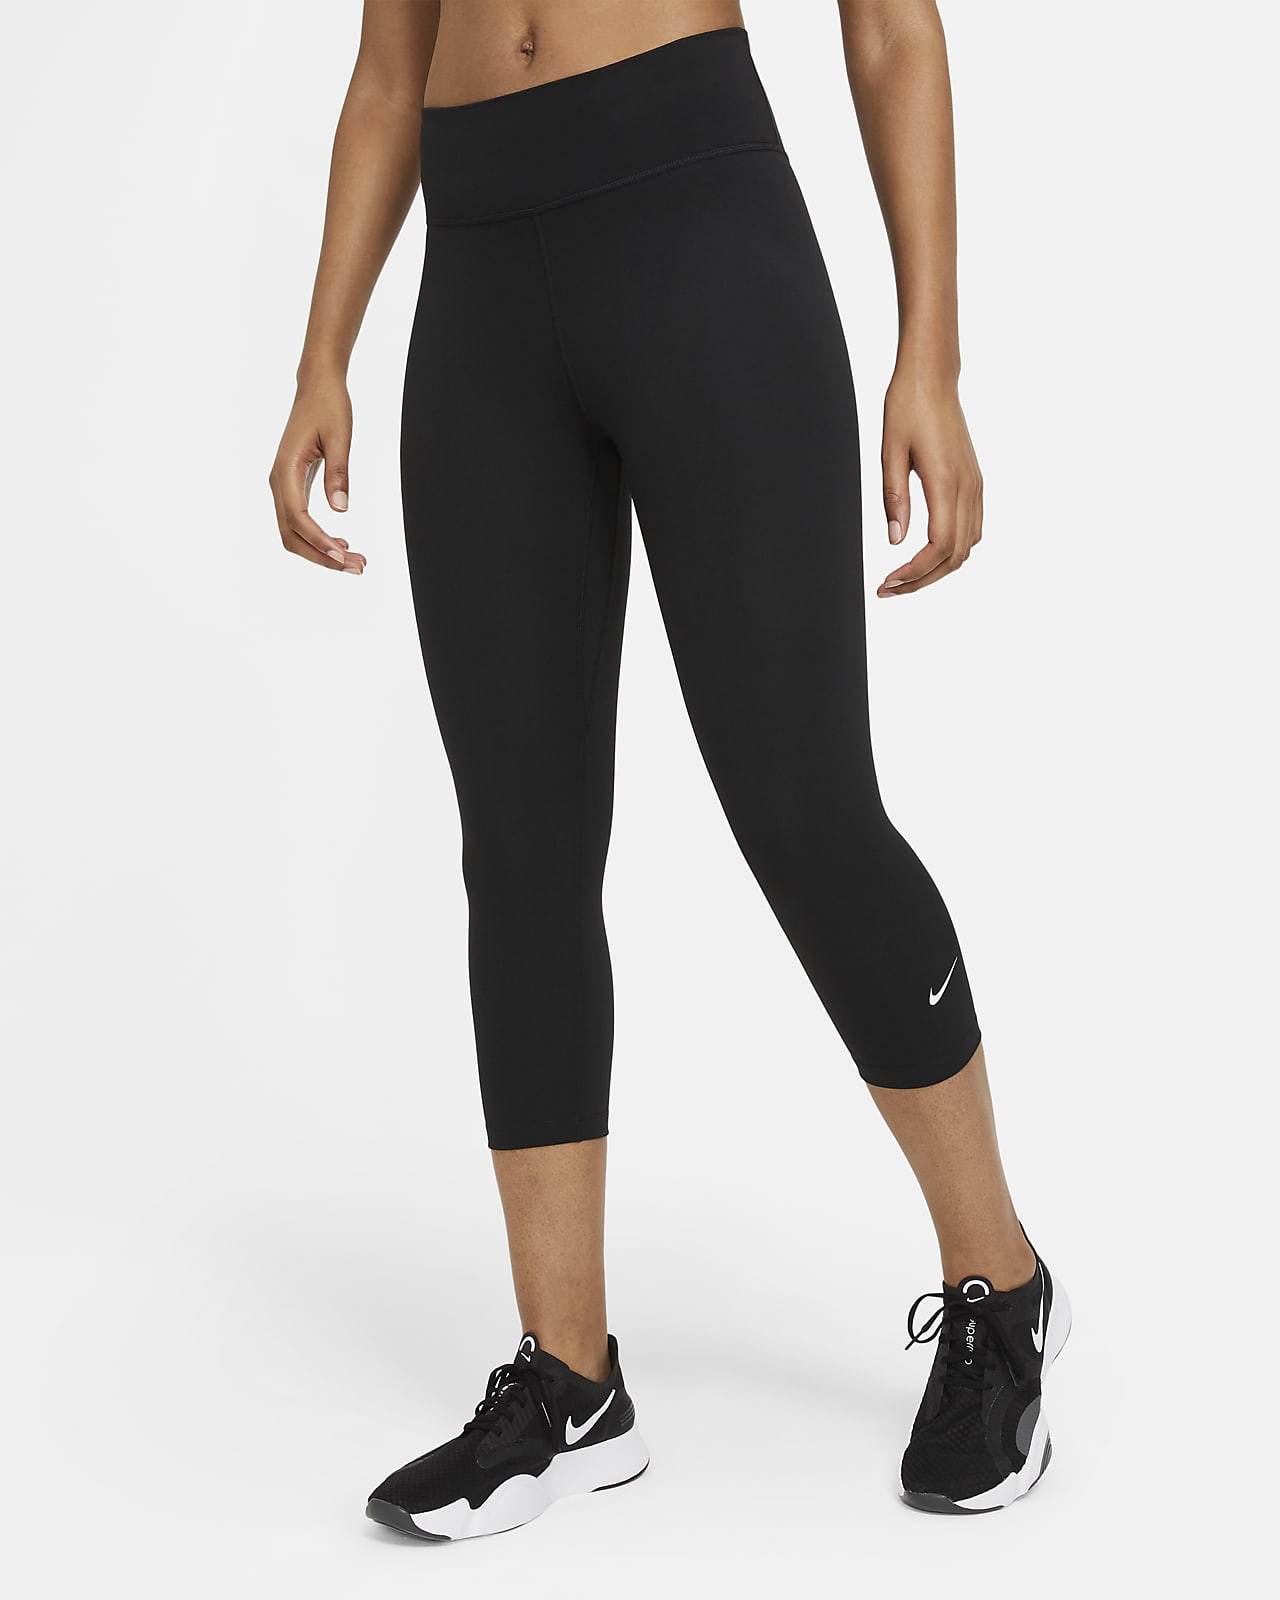 Legging taille Nike One pour FR